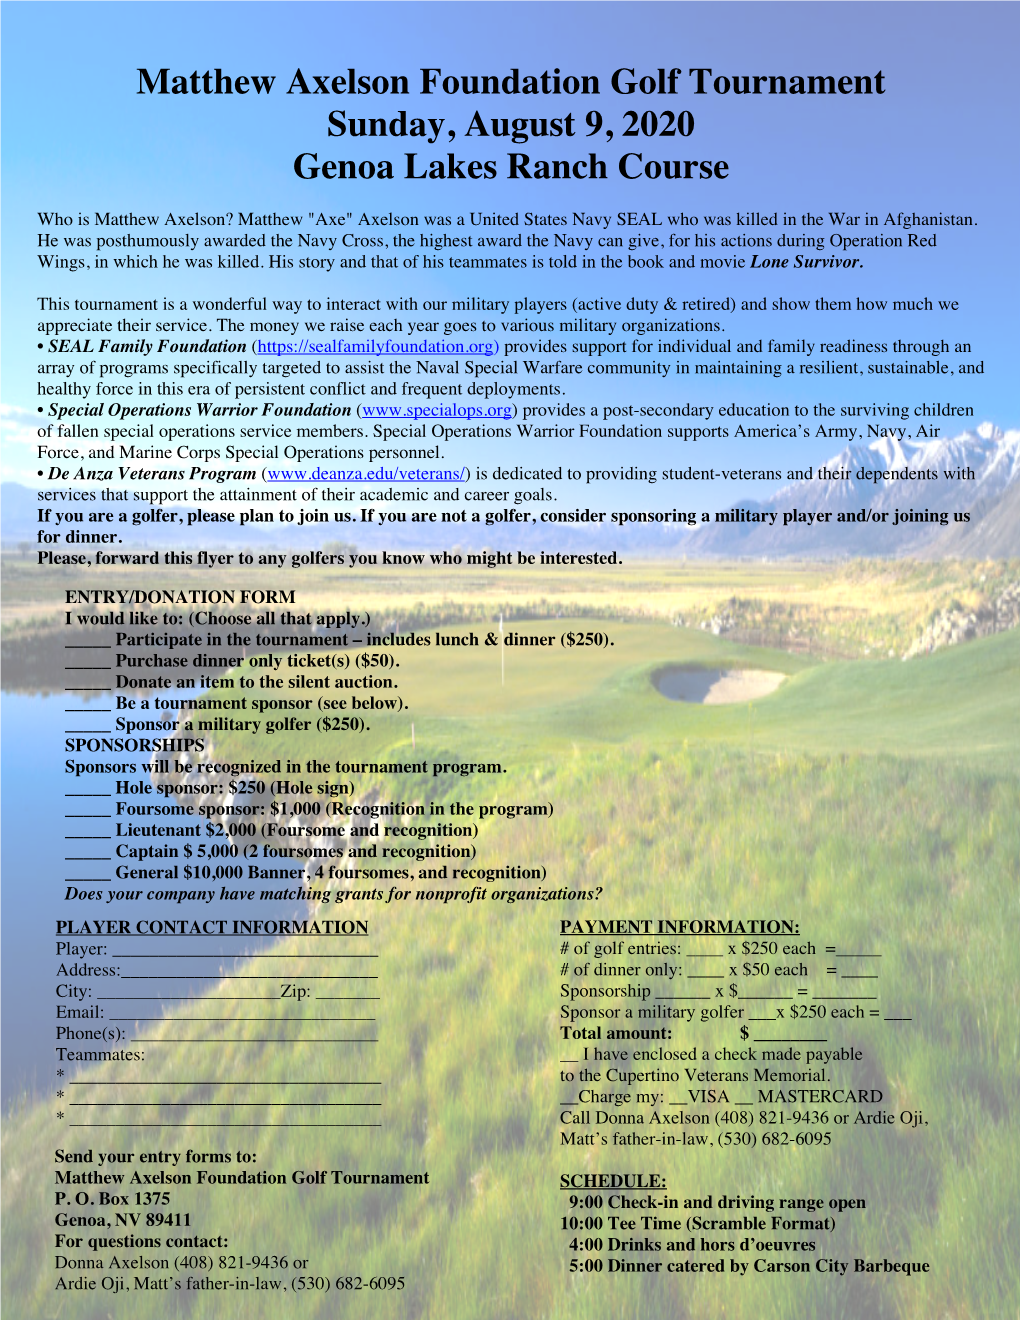 Matthew Axelson Foundation Golf Tournament Sunday, August 9, 2020 Genoa Lakes Ranch Course